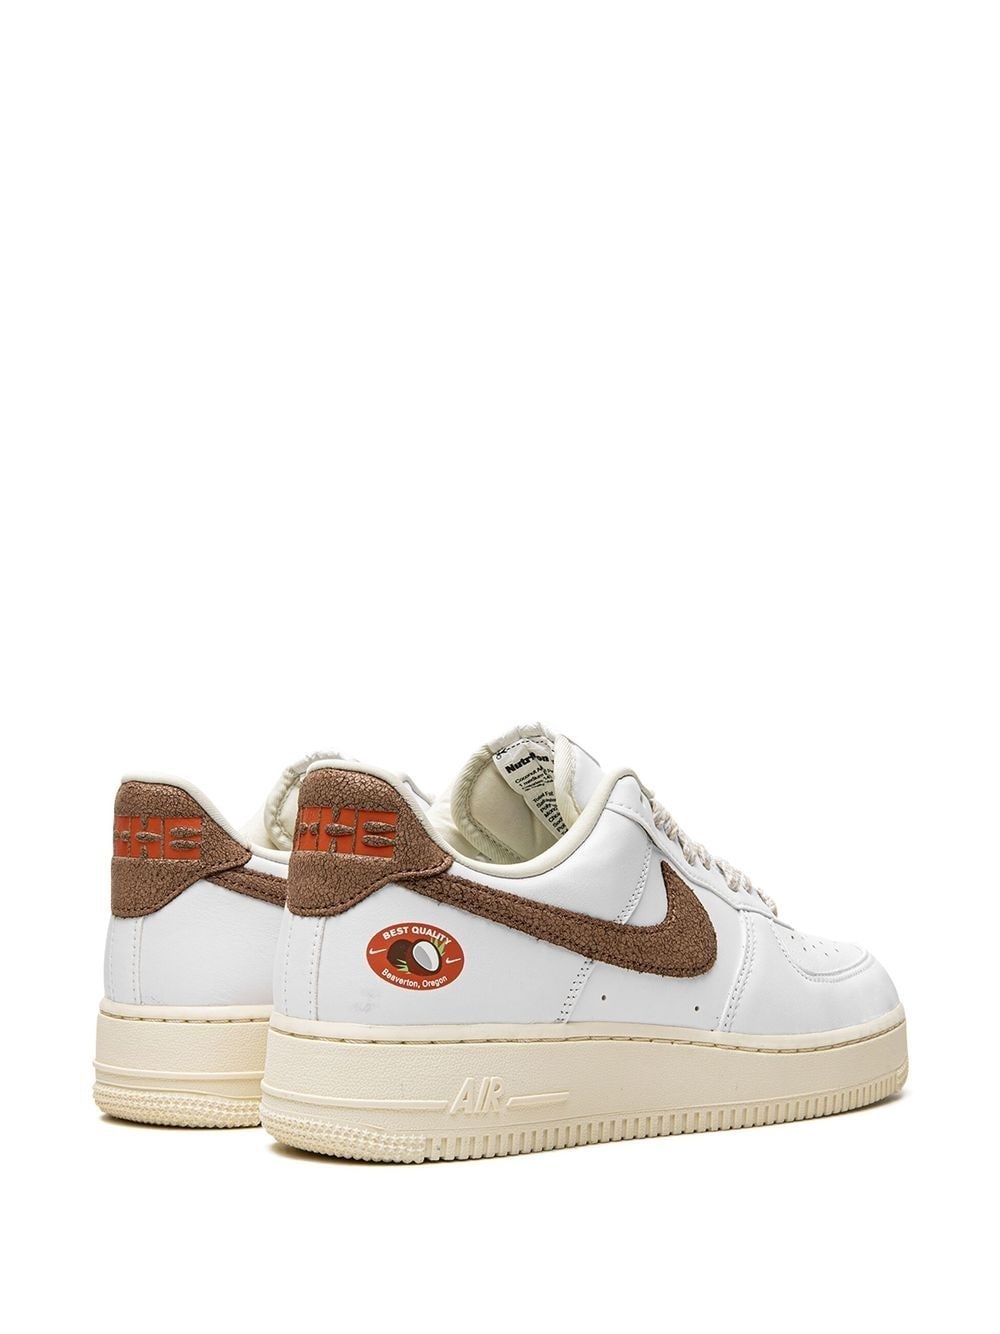 Air Force 1 Low “Coconut” sneakers - 3